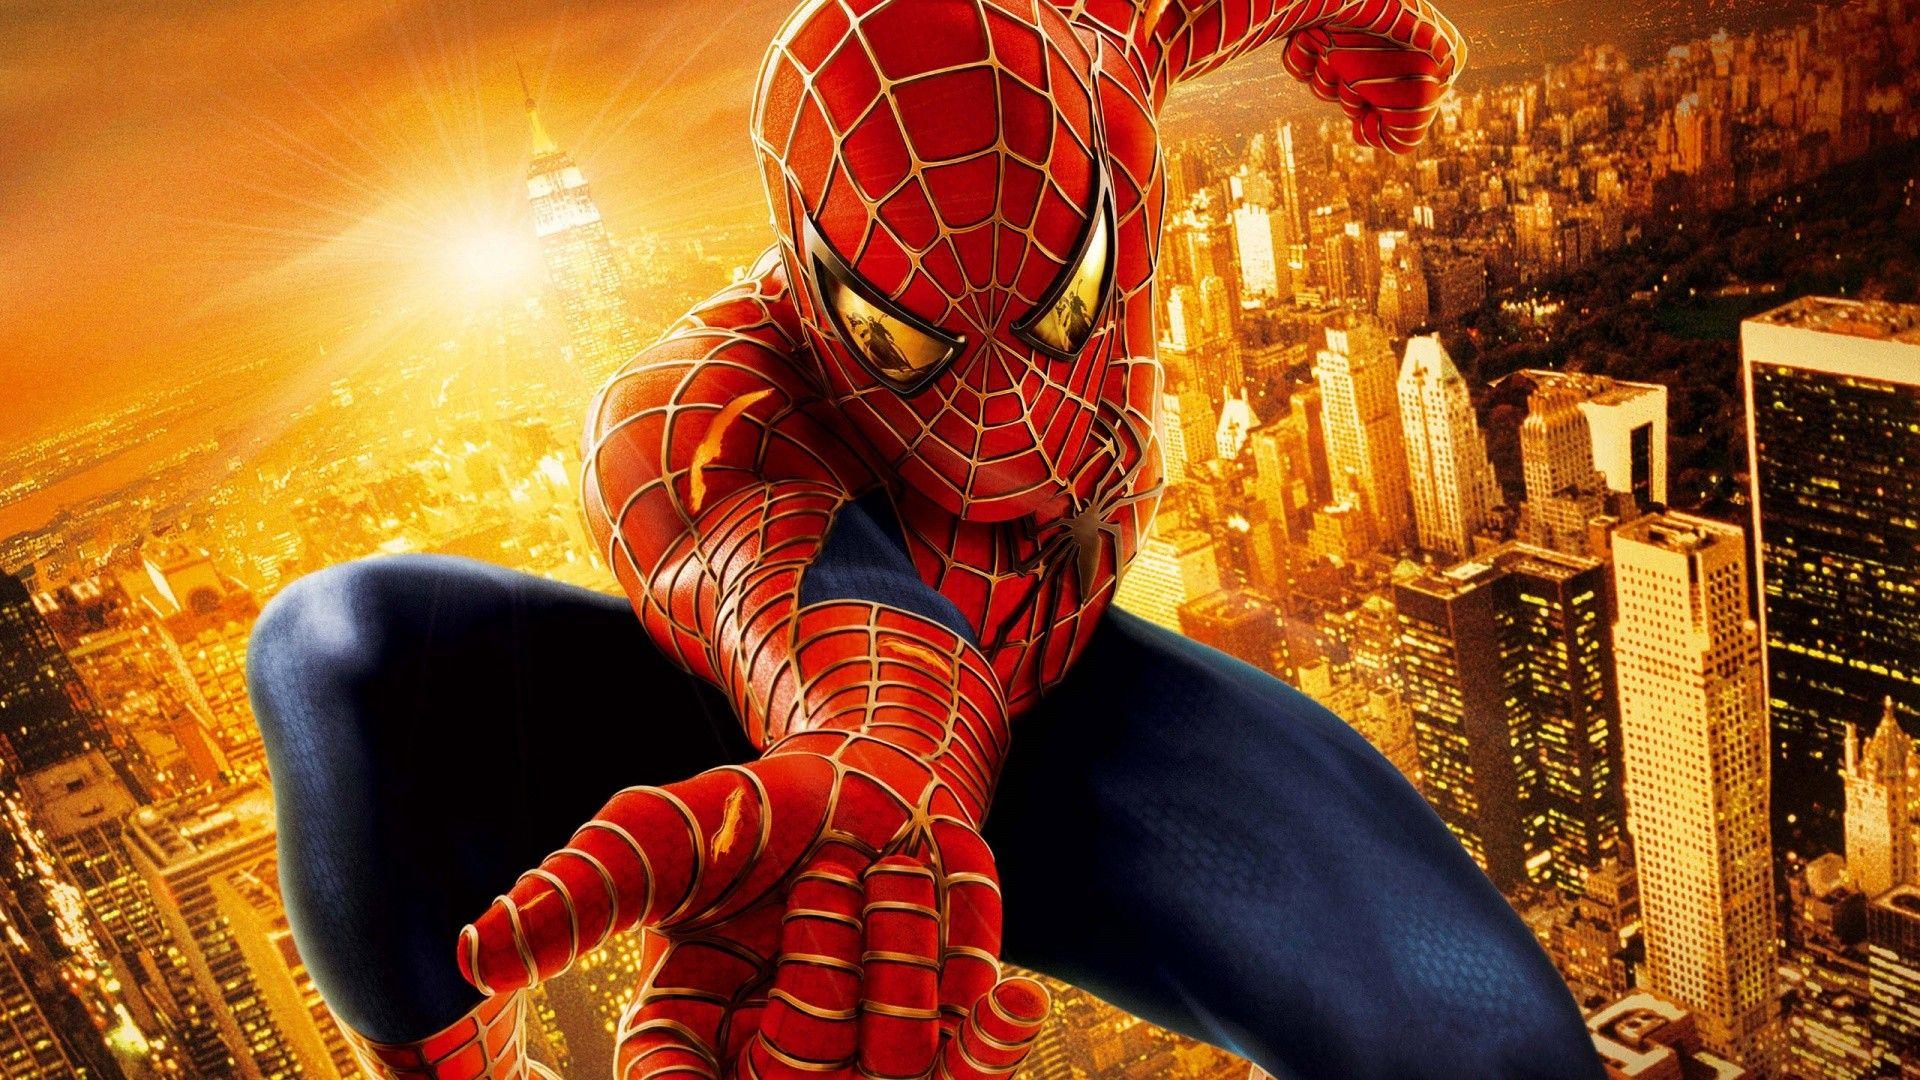 Spider Man 2002 Wallpapers - Top Free Spider Man 2002 Backgrounds ...